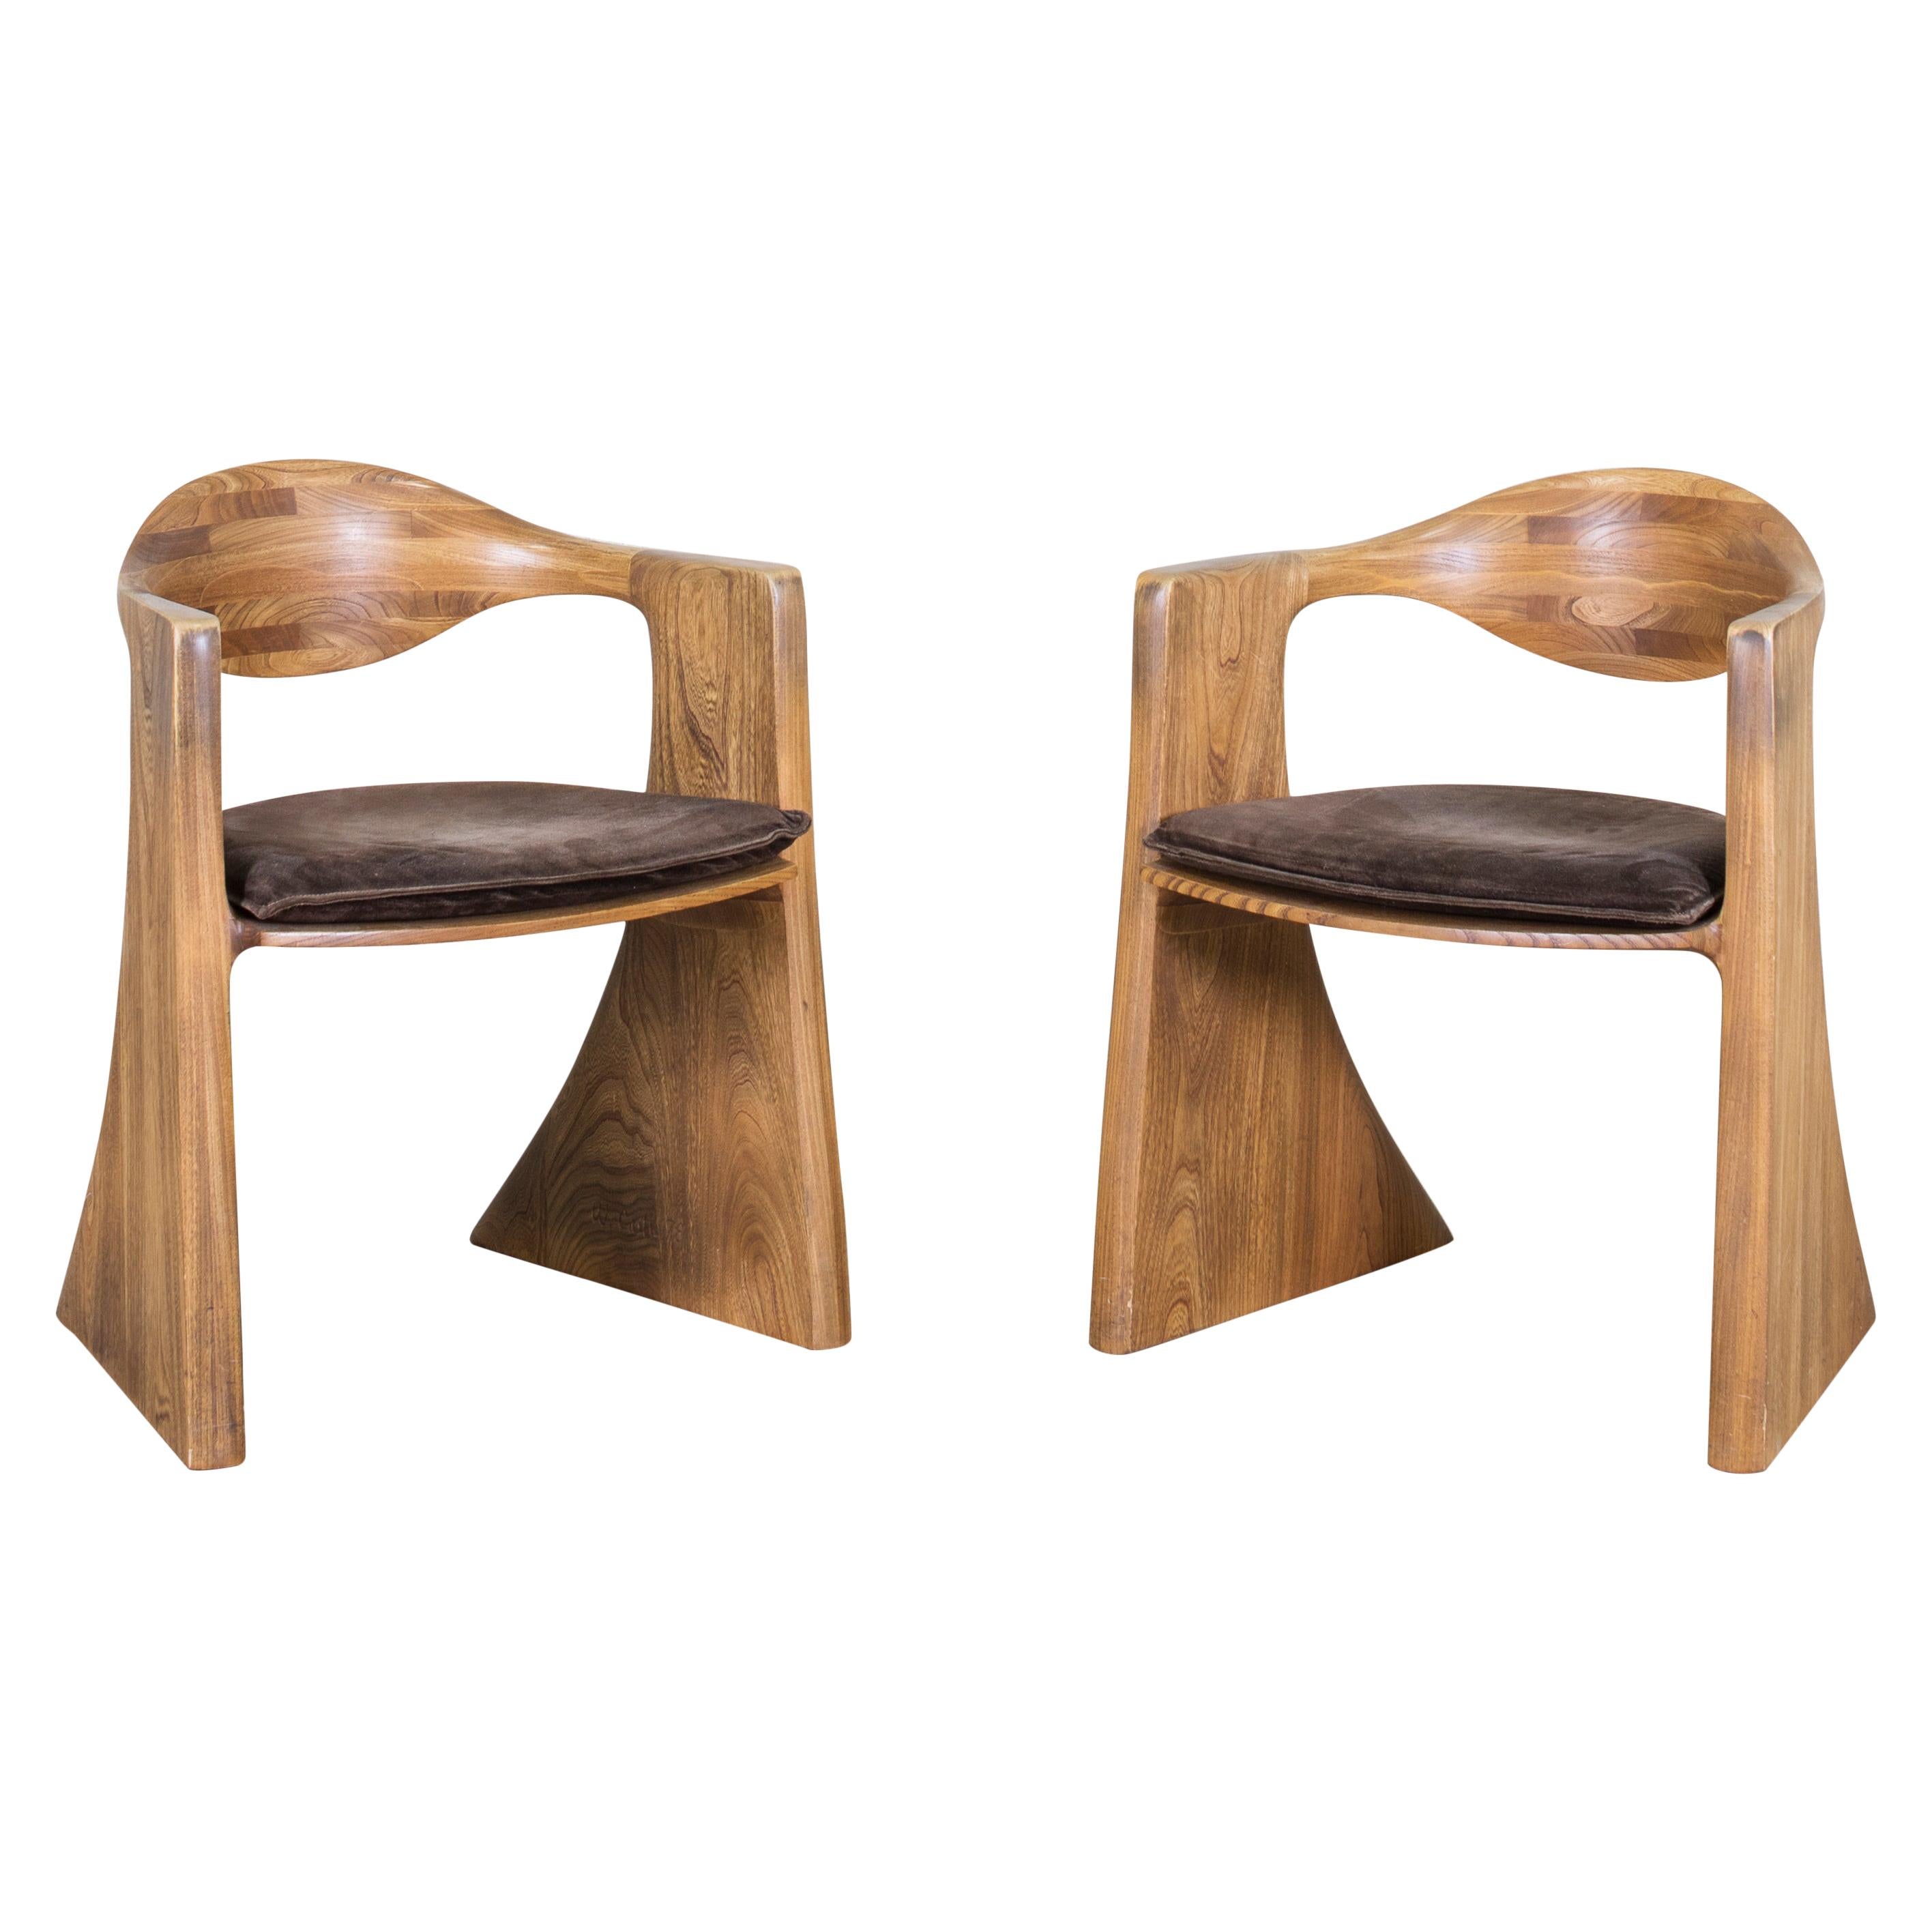 Wendell Castle, Pair of Armchairs, Walnut, 1978